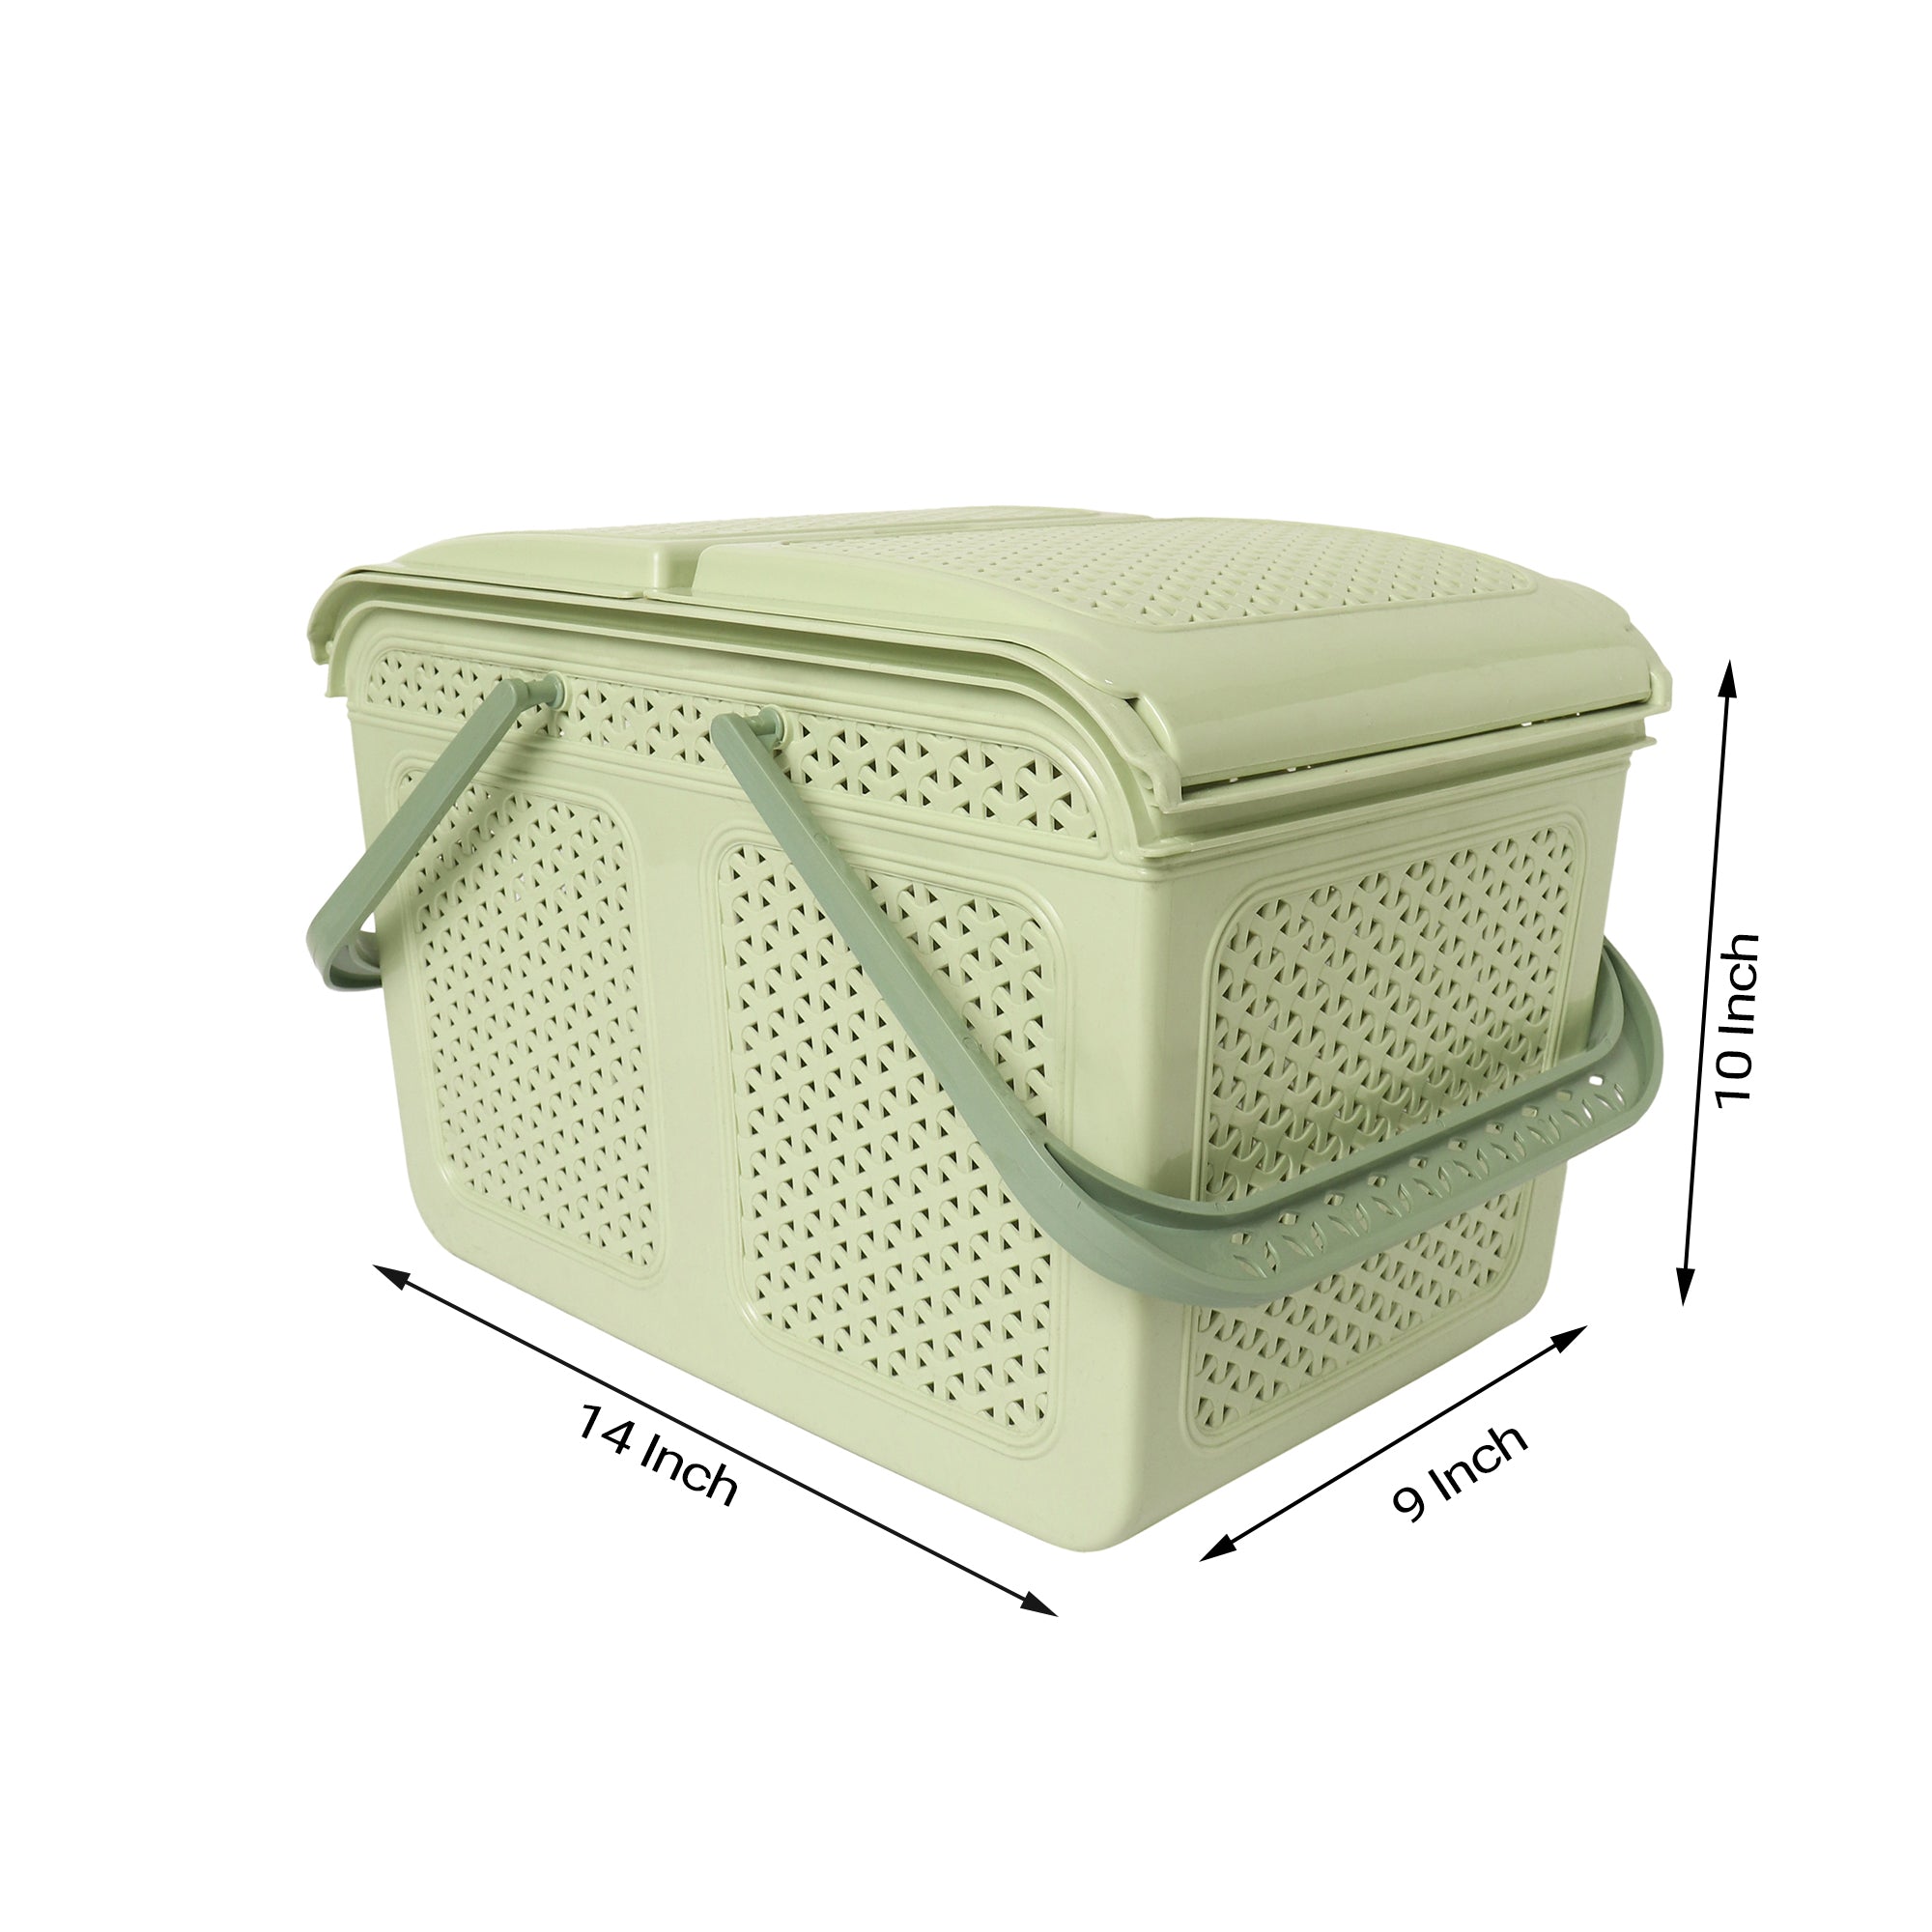 Plastic Lunch Basket with Lid for Office, Home and Picnic Use.